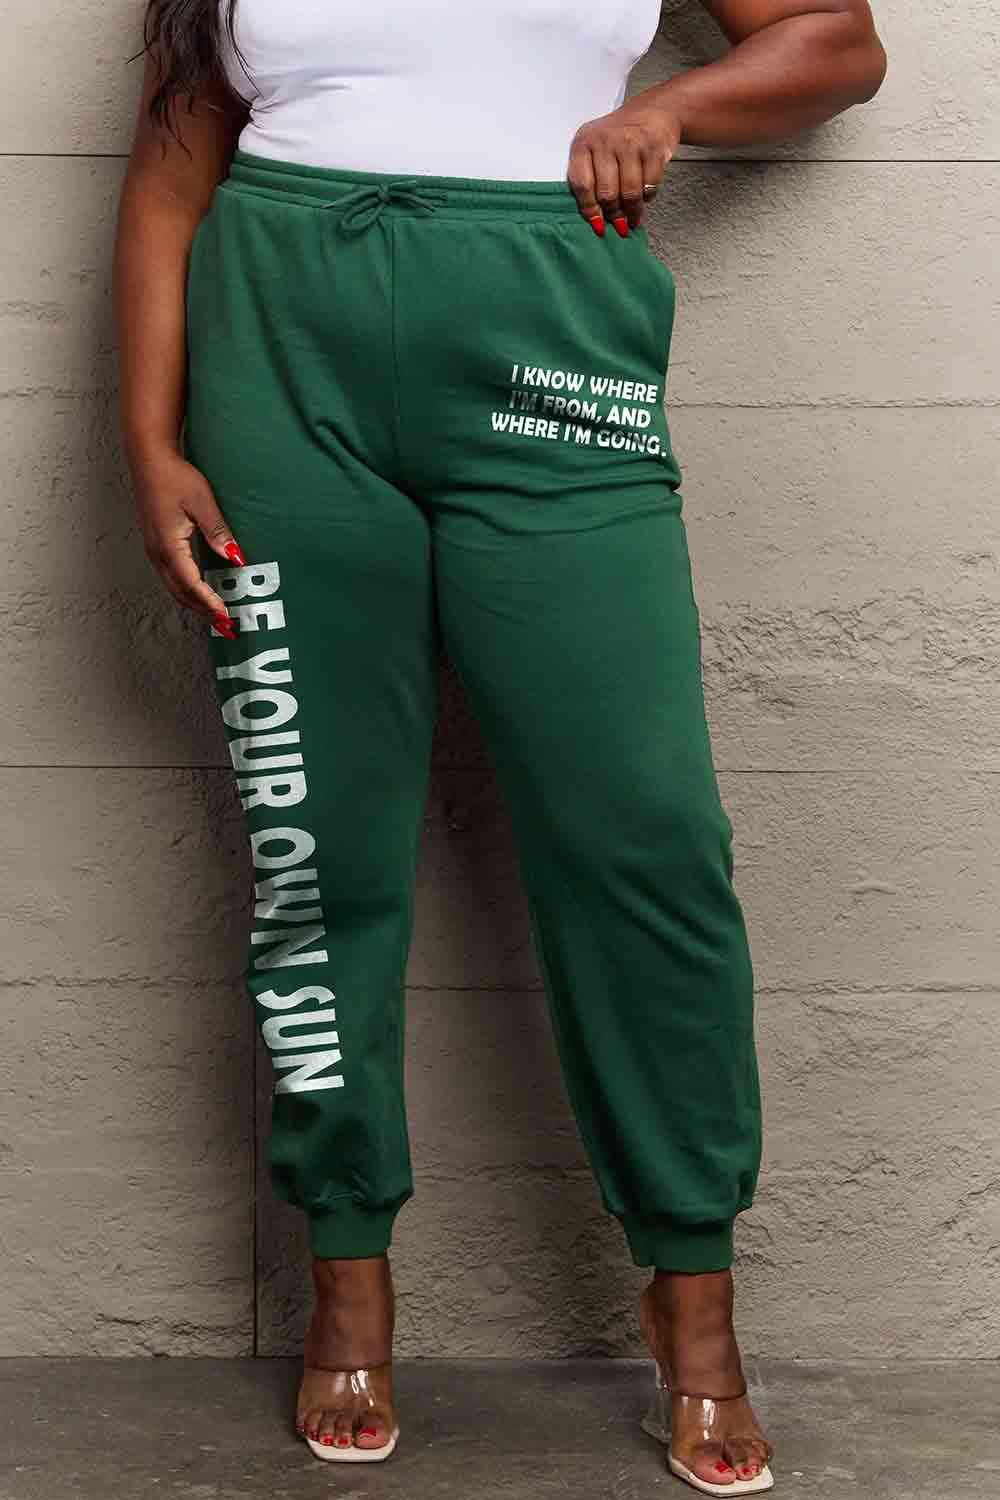 Simply Love Full Size BE YOUR OWN SUN Graphic Sweatpants Green